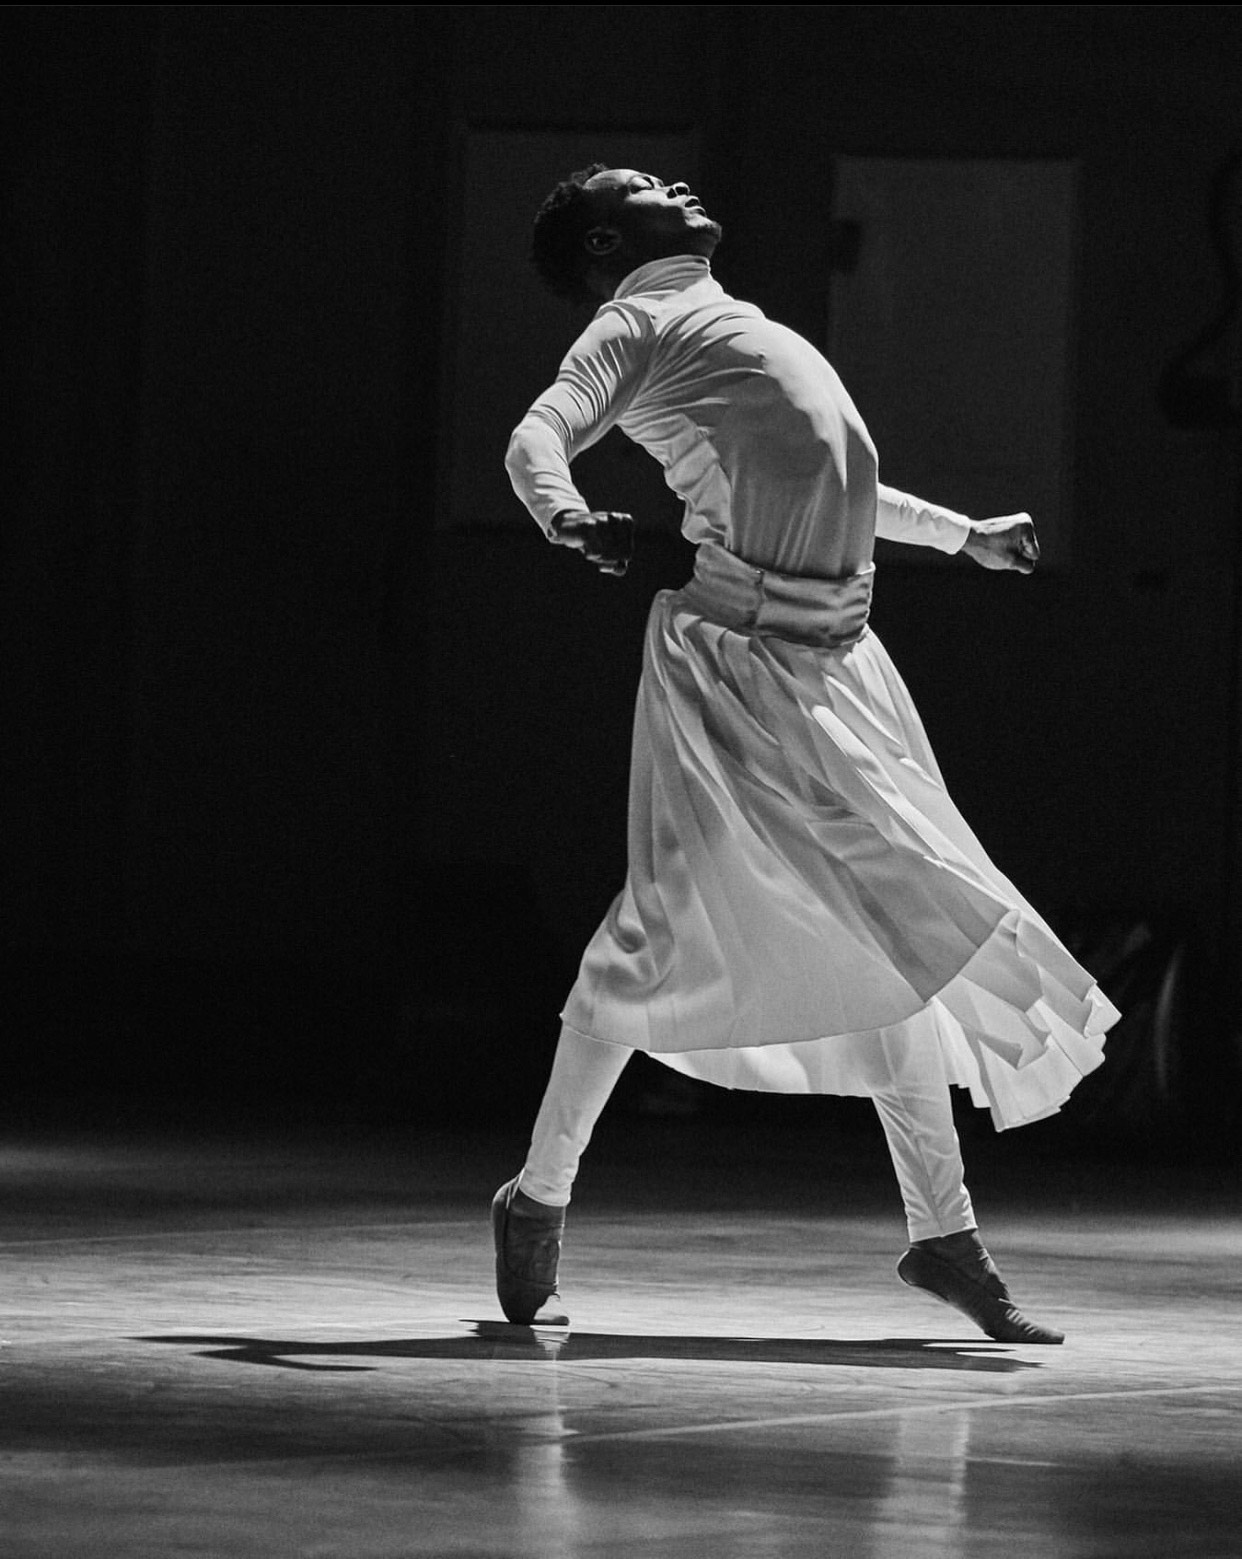 A black and white image of a male dancer in a white top and long skirt performing on stage.